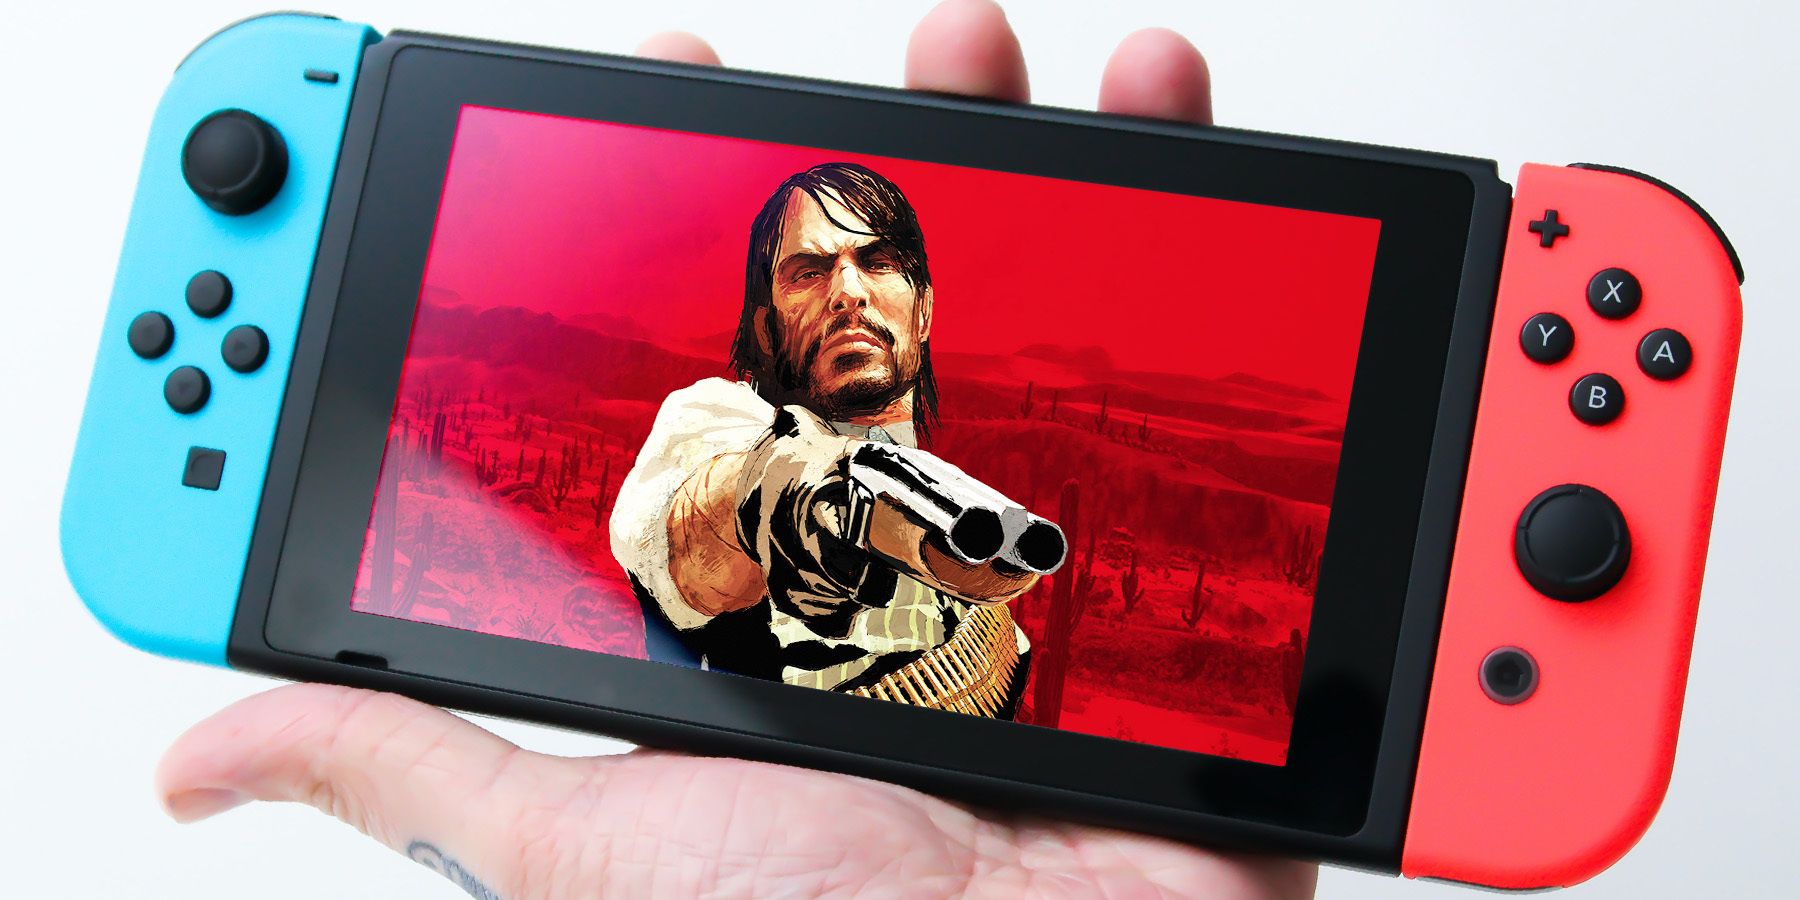 Red Dead Redemption coming to PS4 and Nintendo Switch — but not Windows PC